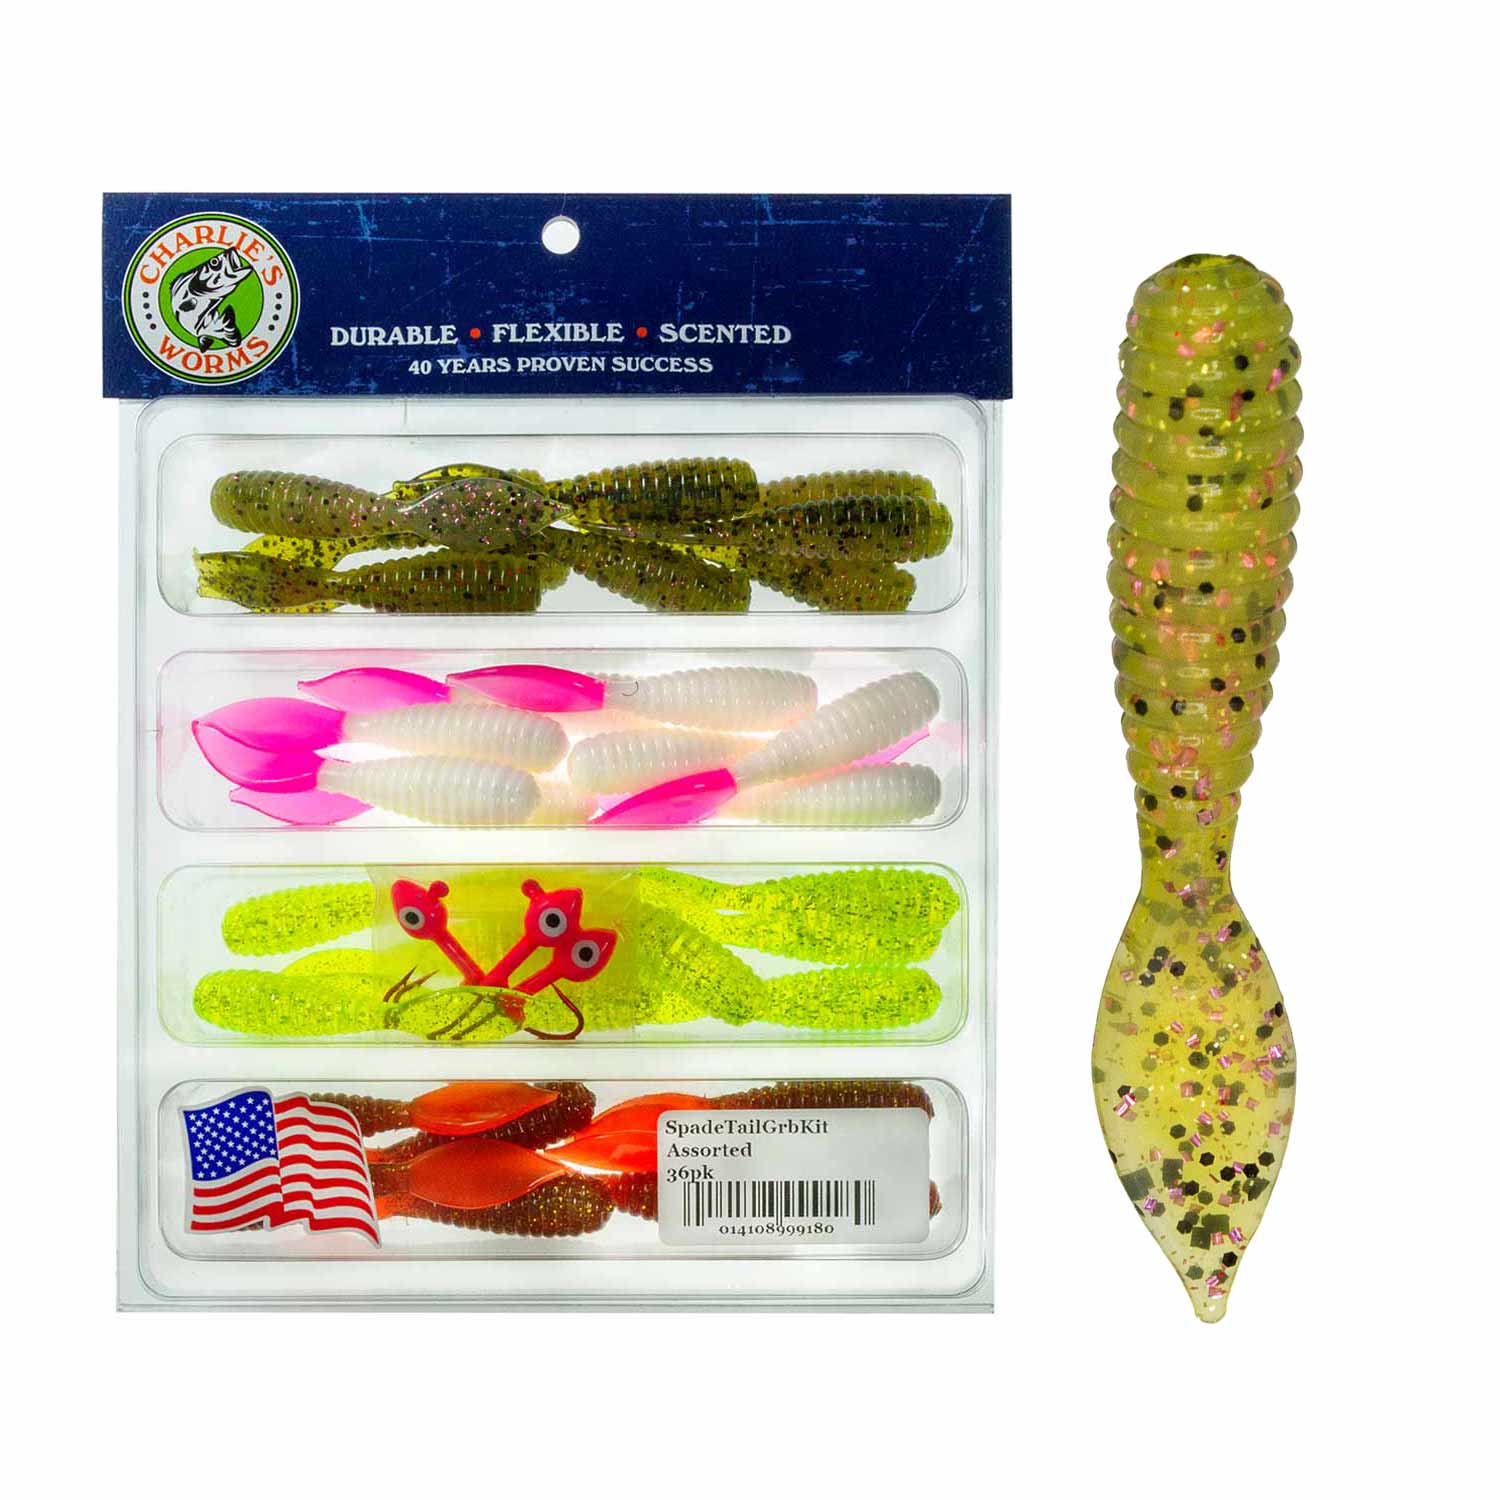 5 Curly-Tail Grub (10 Pack) - Root Beer Green